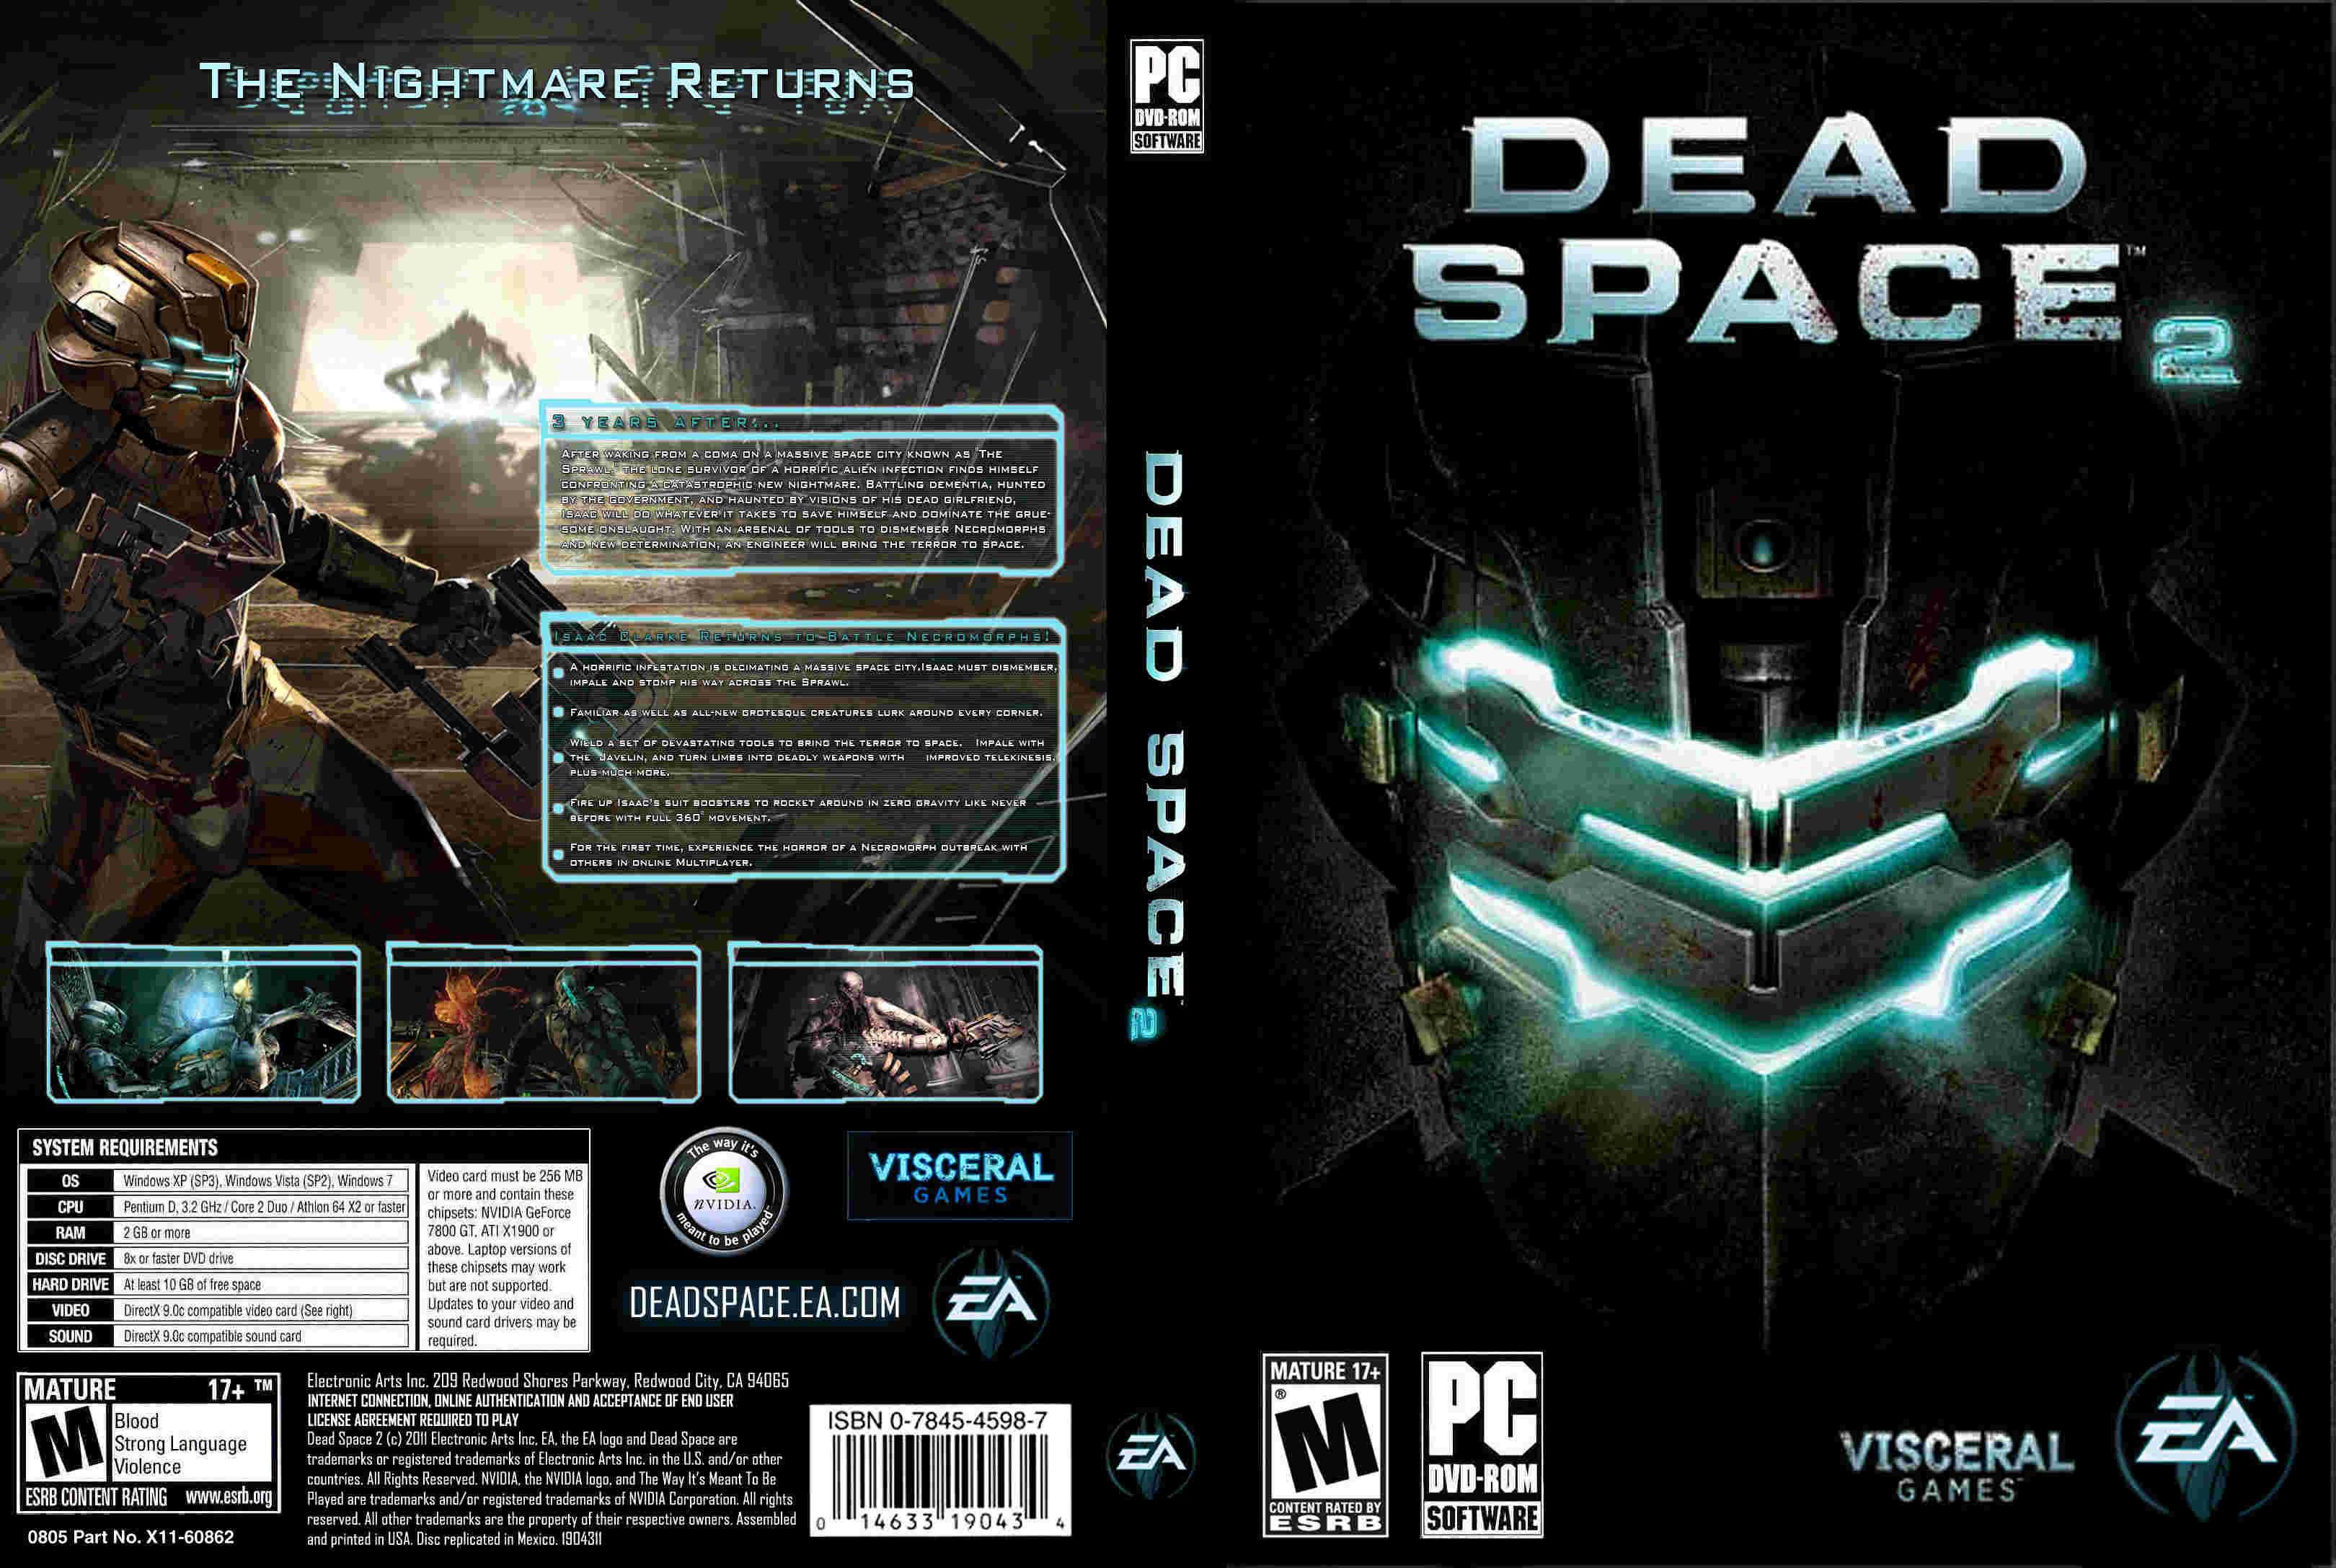 dead space 1 could not initialize display hardware